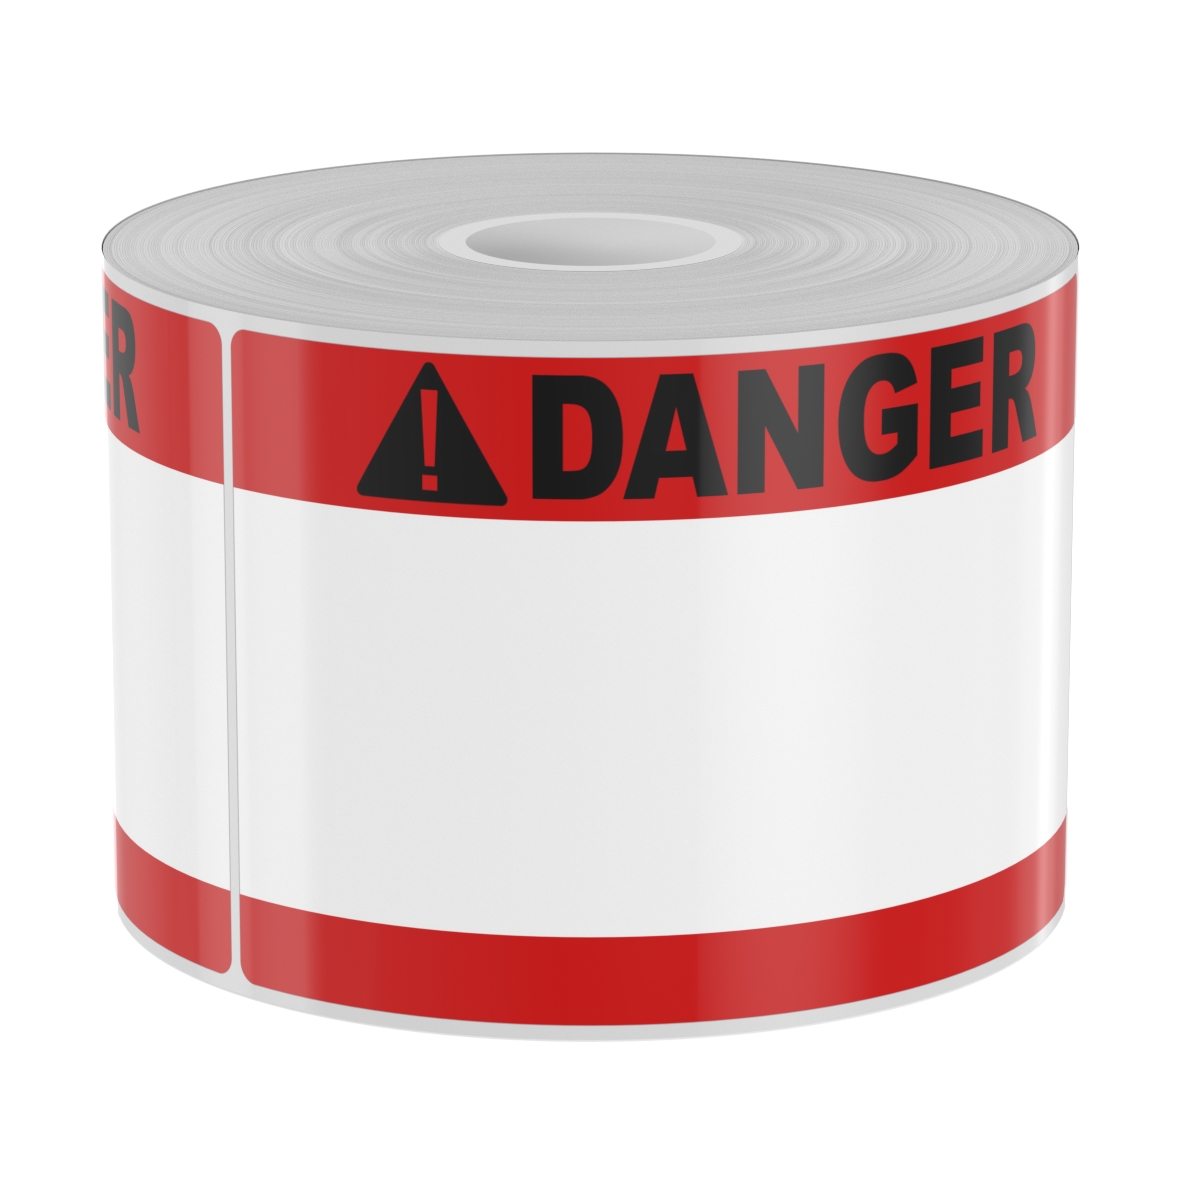 Ask a question about 250 3" x 5" High-Performance Red Double Band with Black Danger